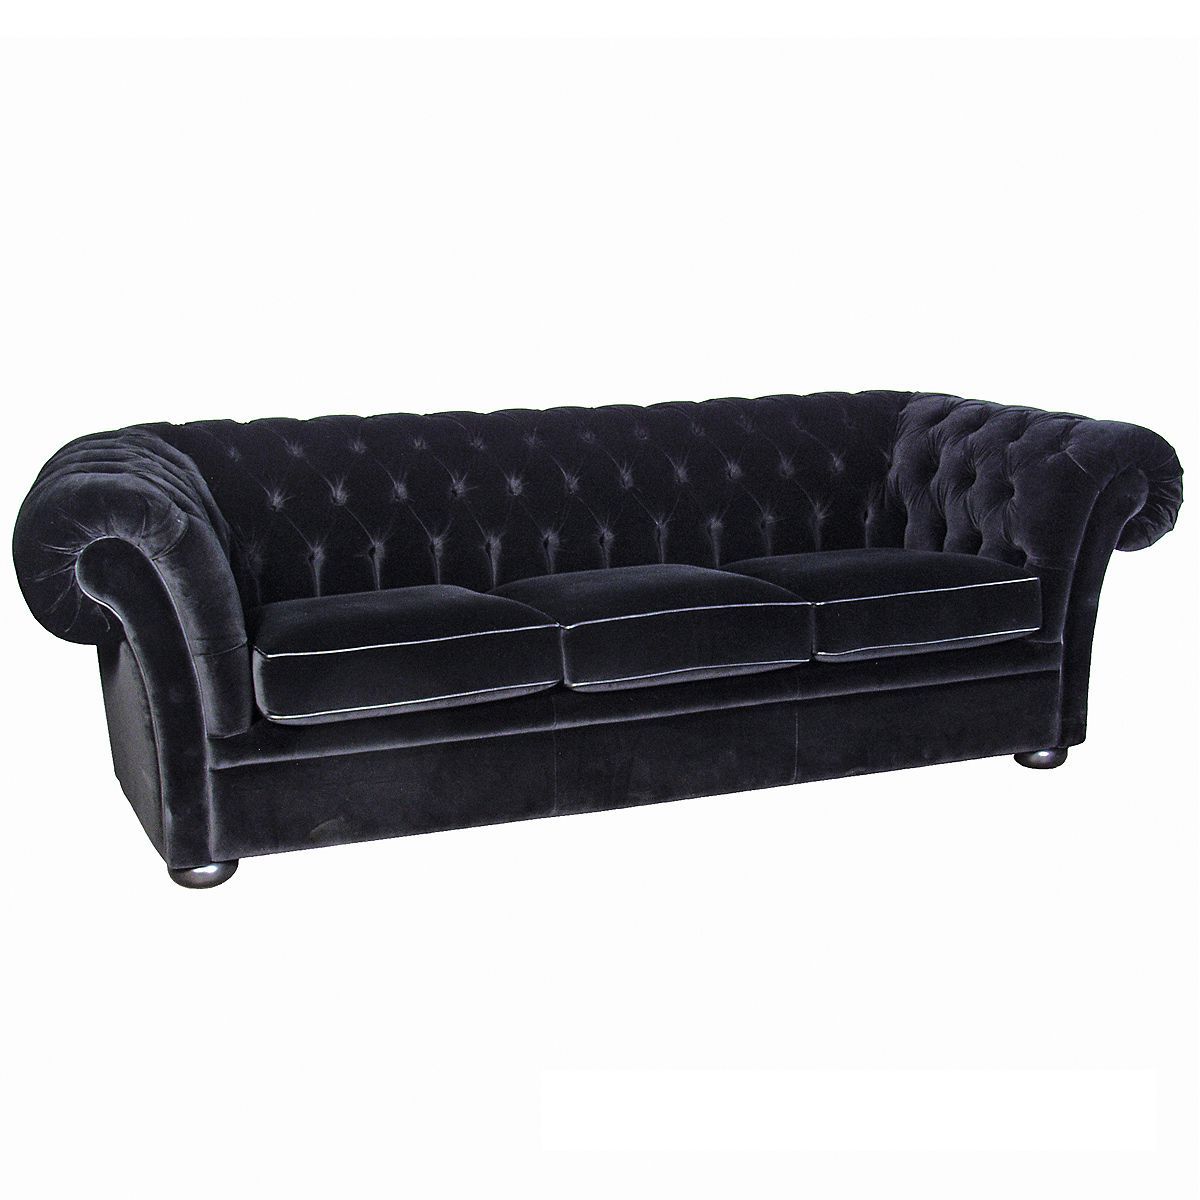 Well Liked 4pc French Seamed Sectional Sofas Velvet Black Inside 2 Seater: W190 X D90 X H75cm 3 Seater: W245 X D90 X H75cm (View 5 of 20)